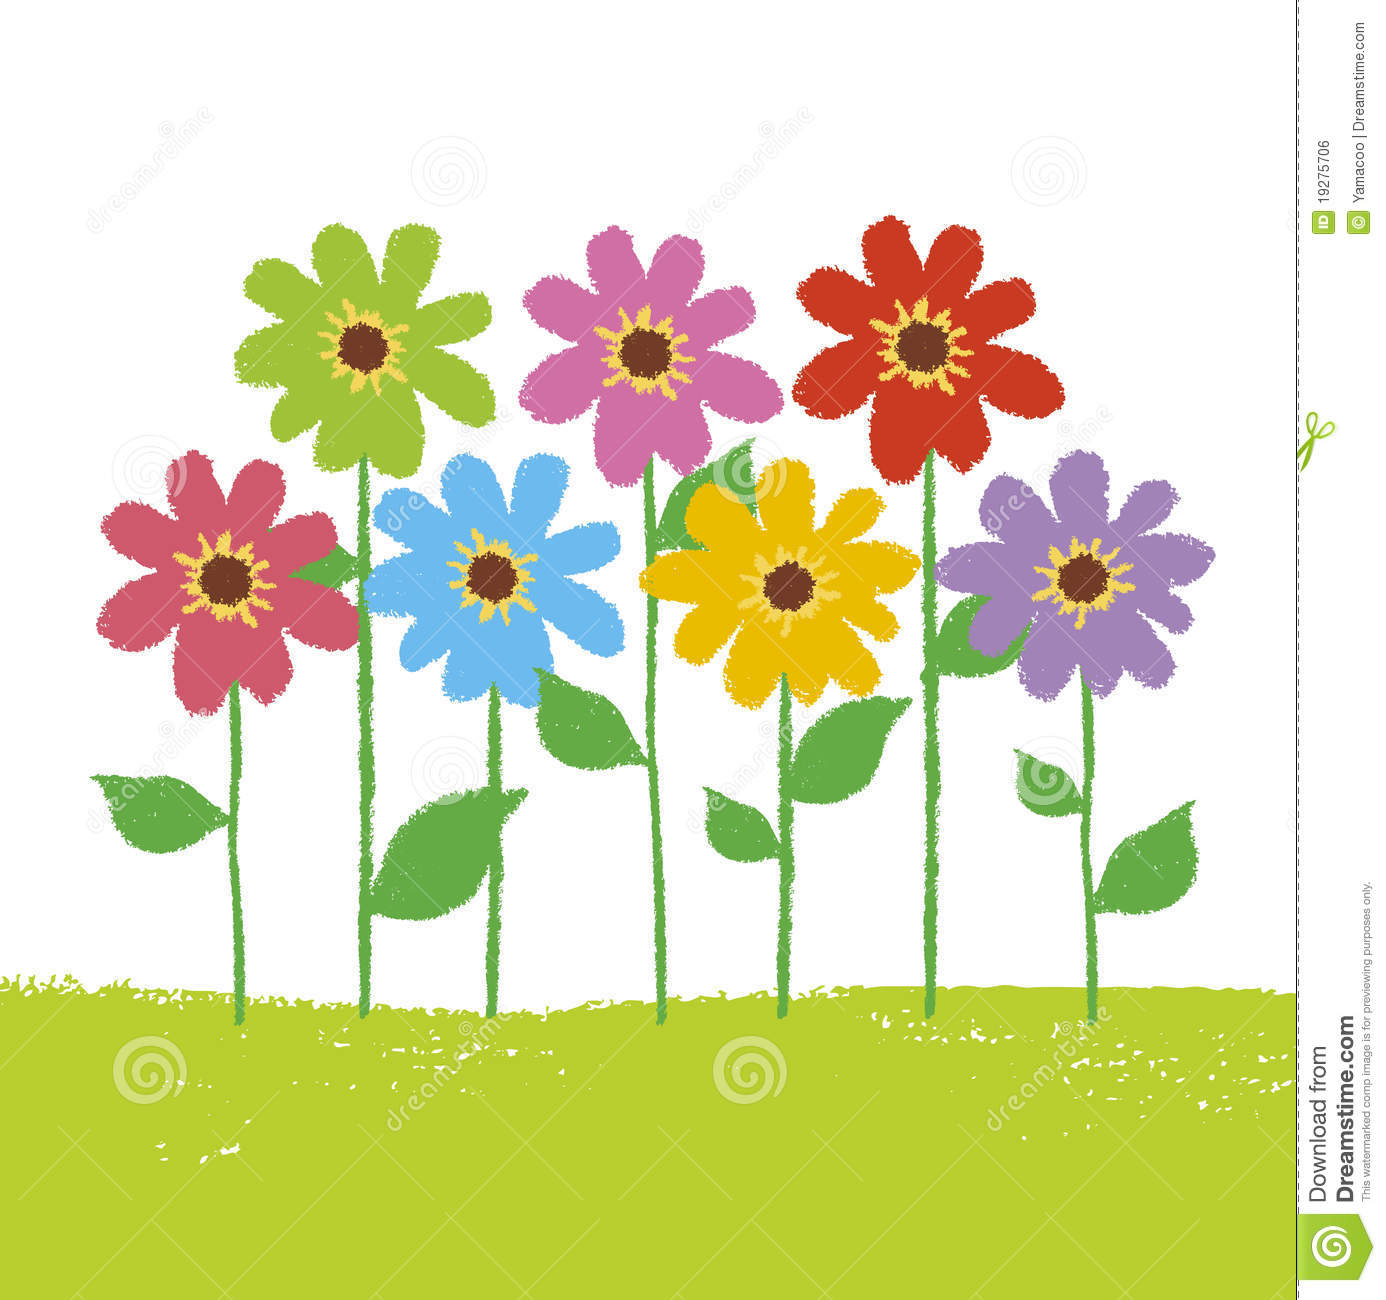 Whimsical Flower Garden with 